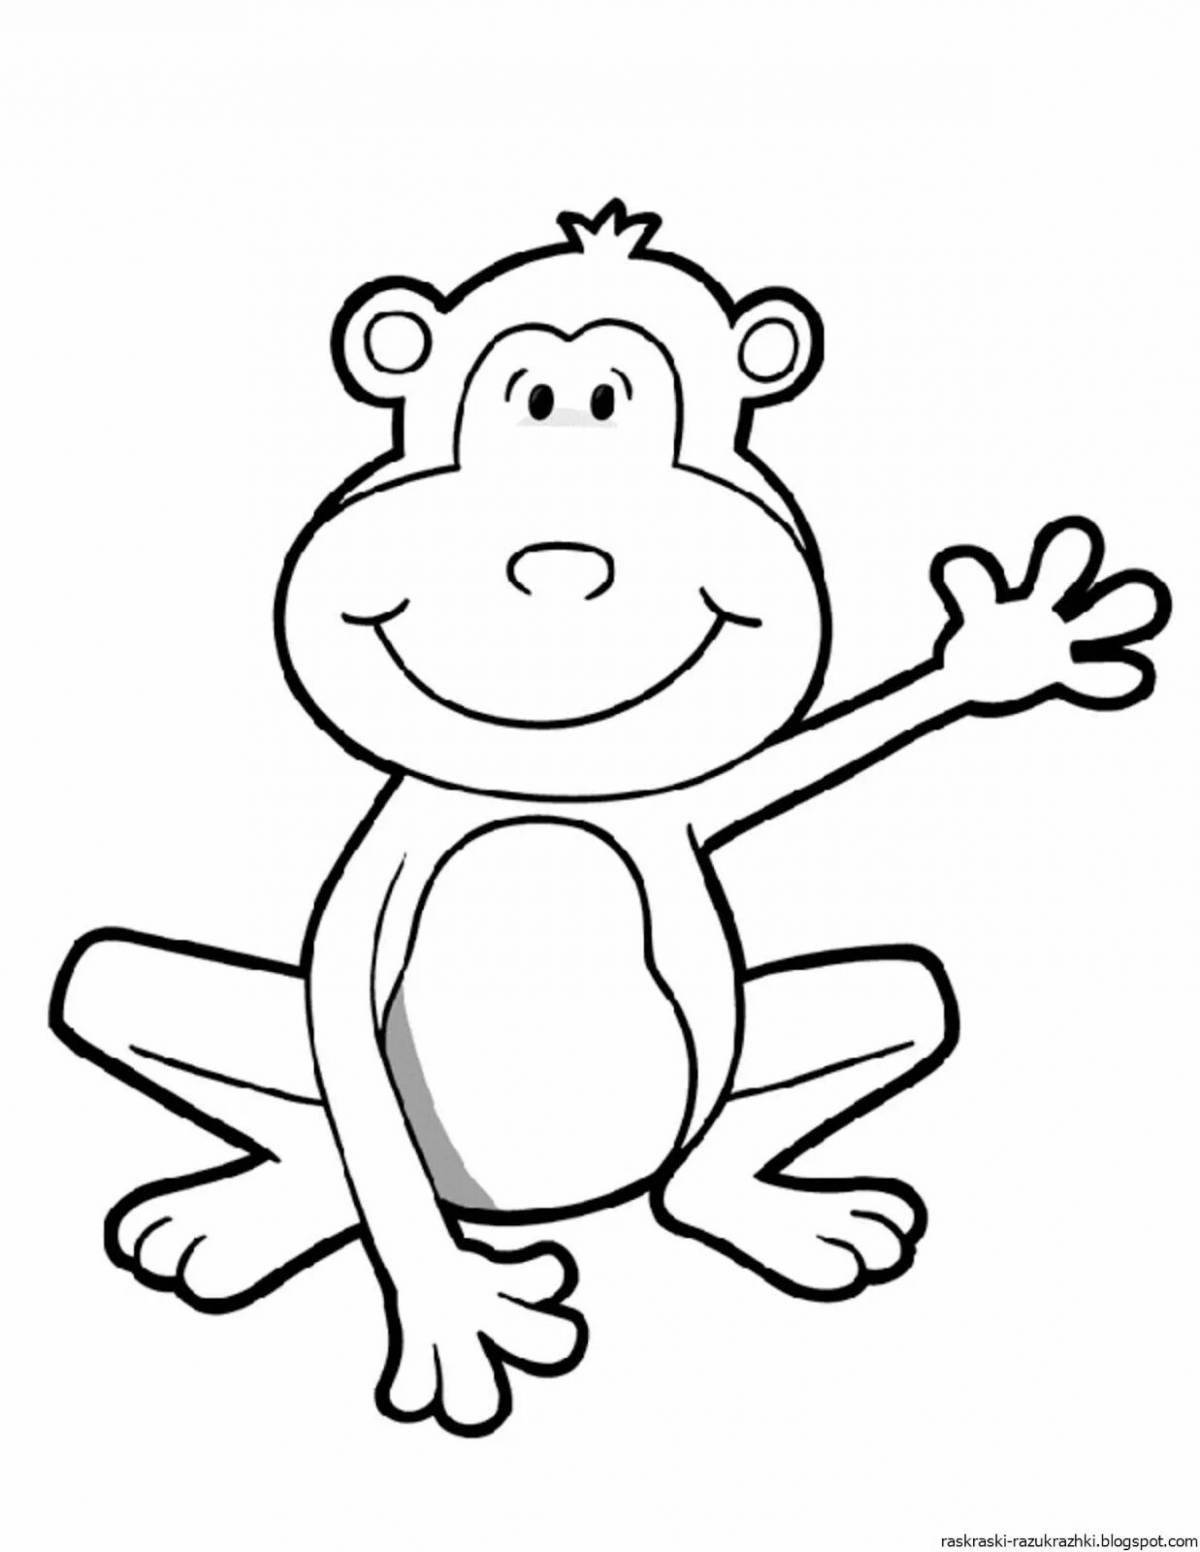 Naughty monkey drawing for kids